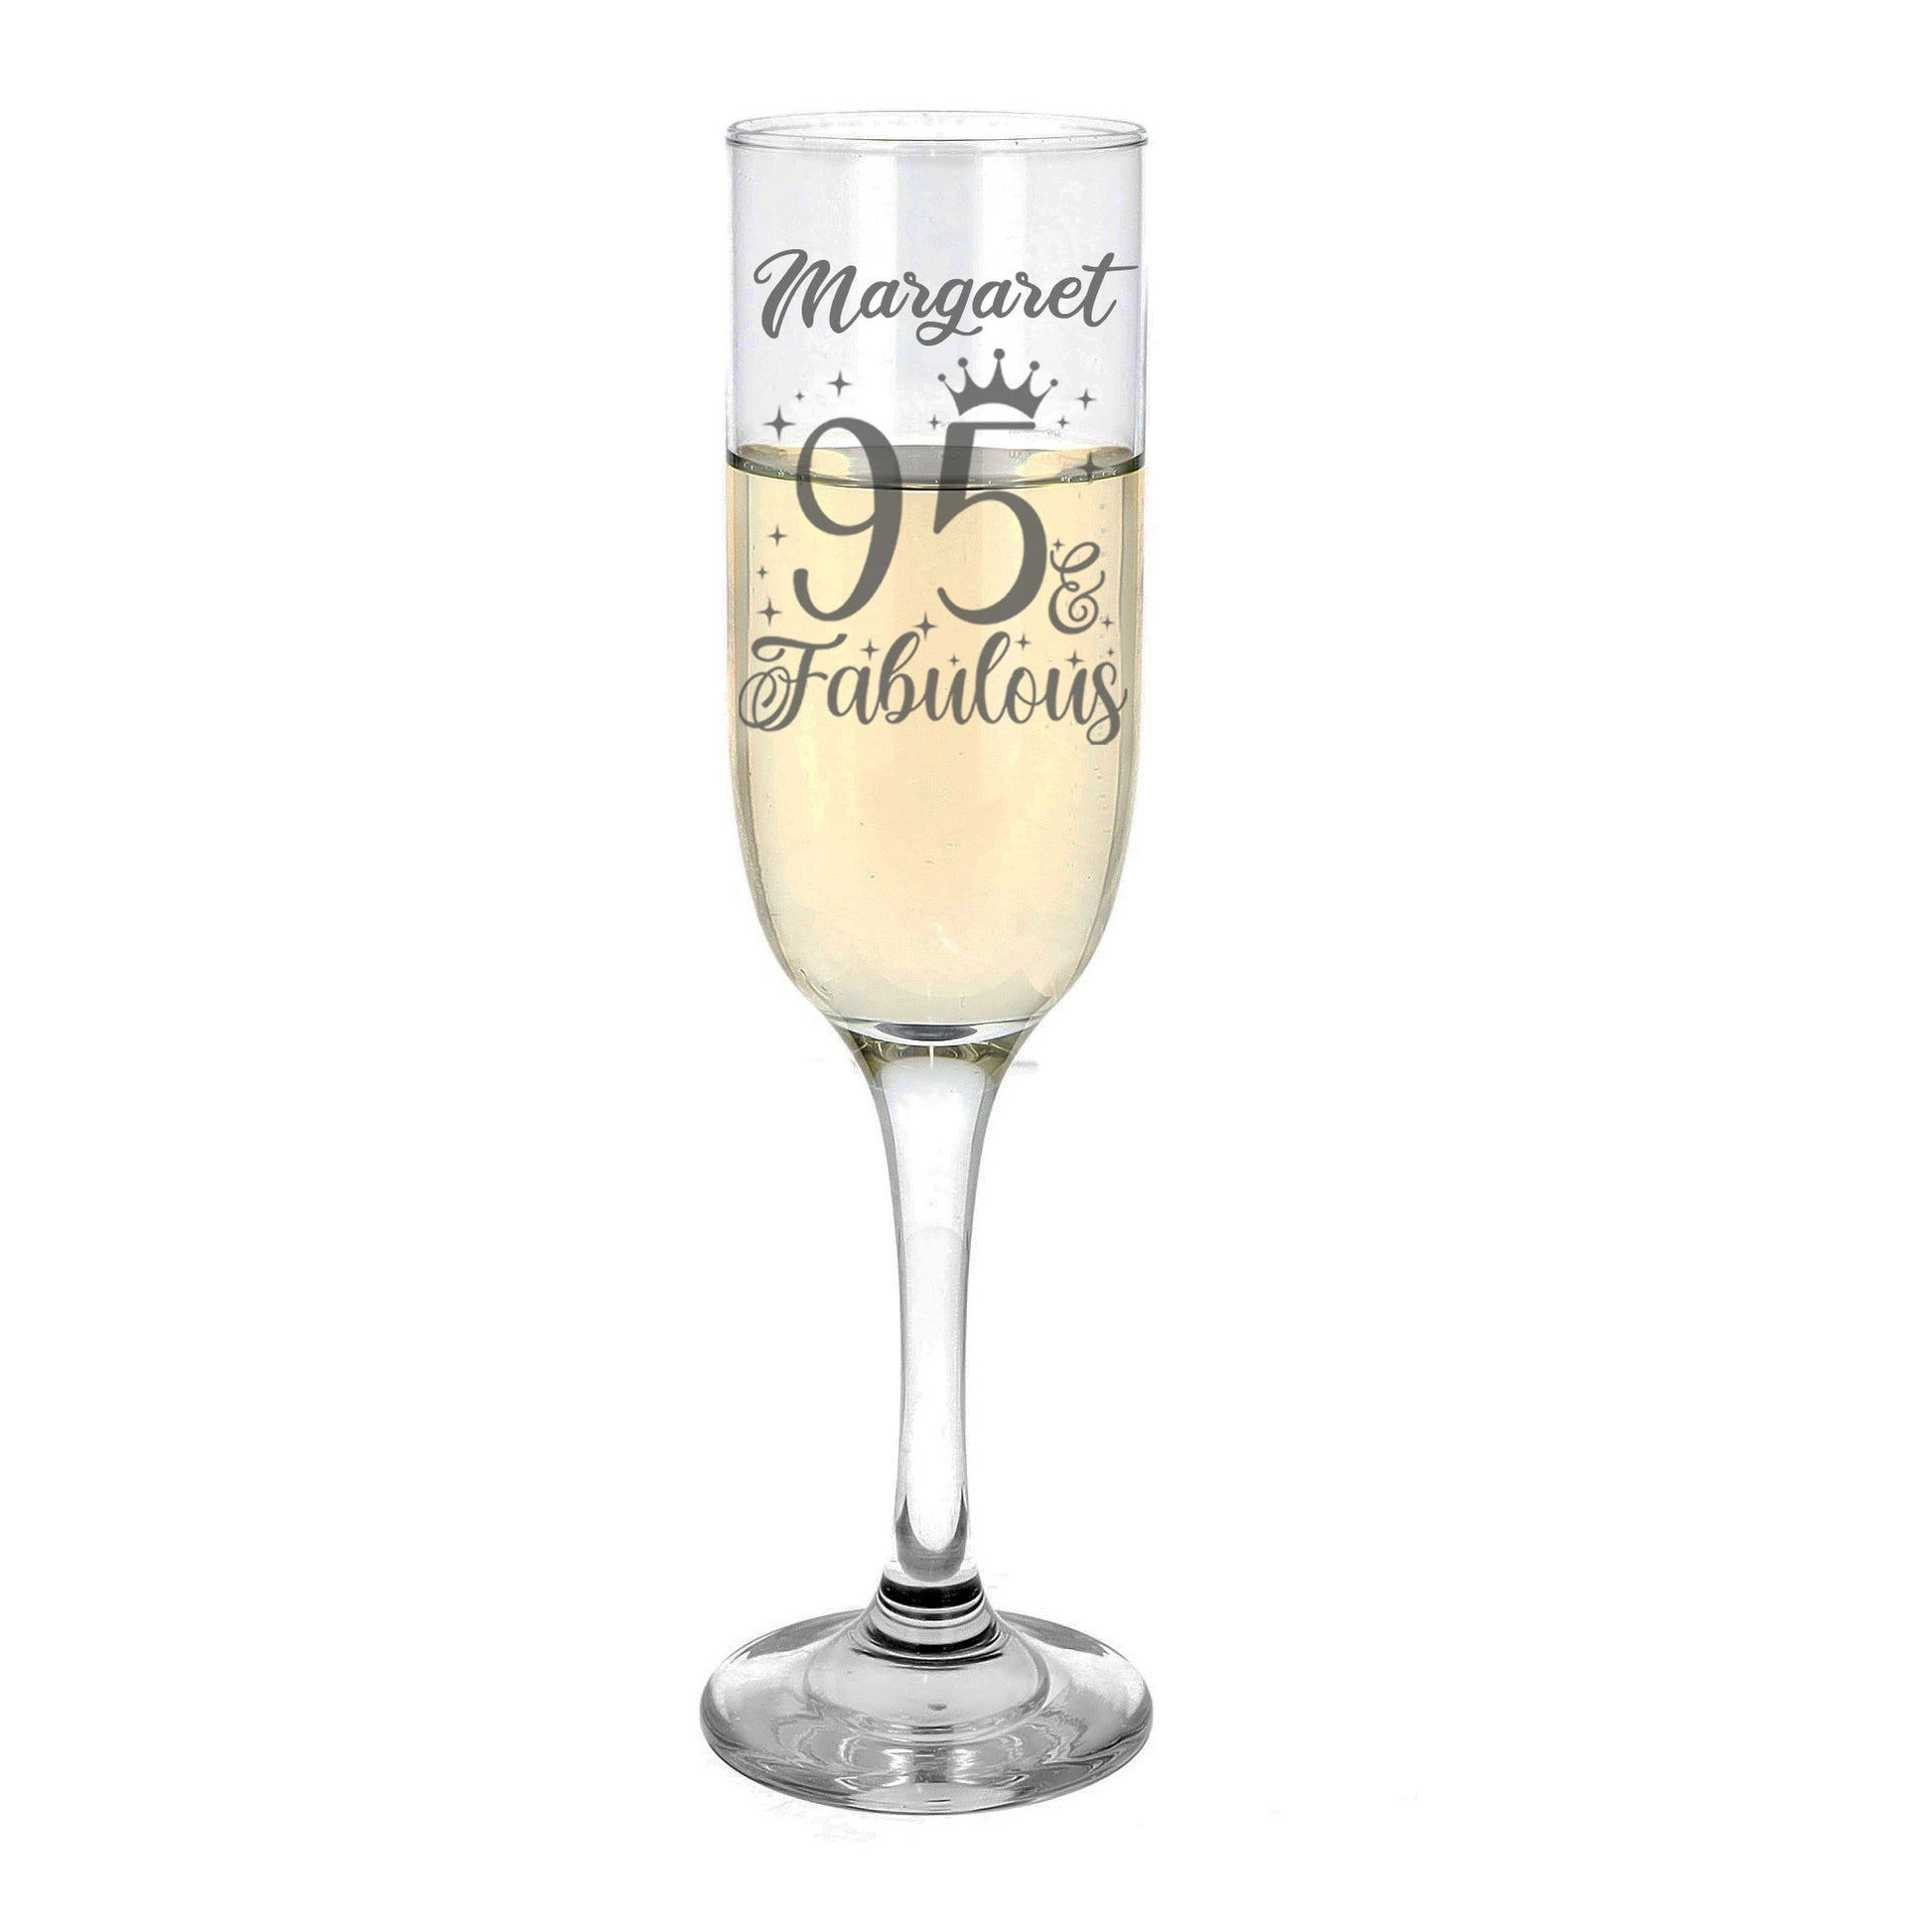 95 & Fabulous Engraved Champagne Glass and/or Coaster Set  - Always Looking Good -   